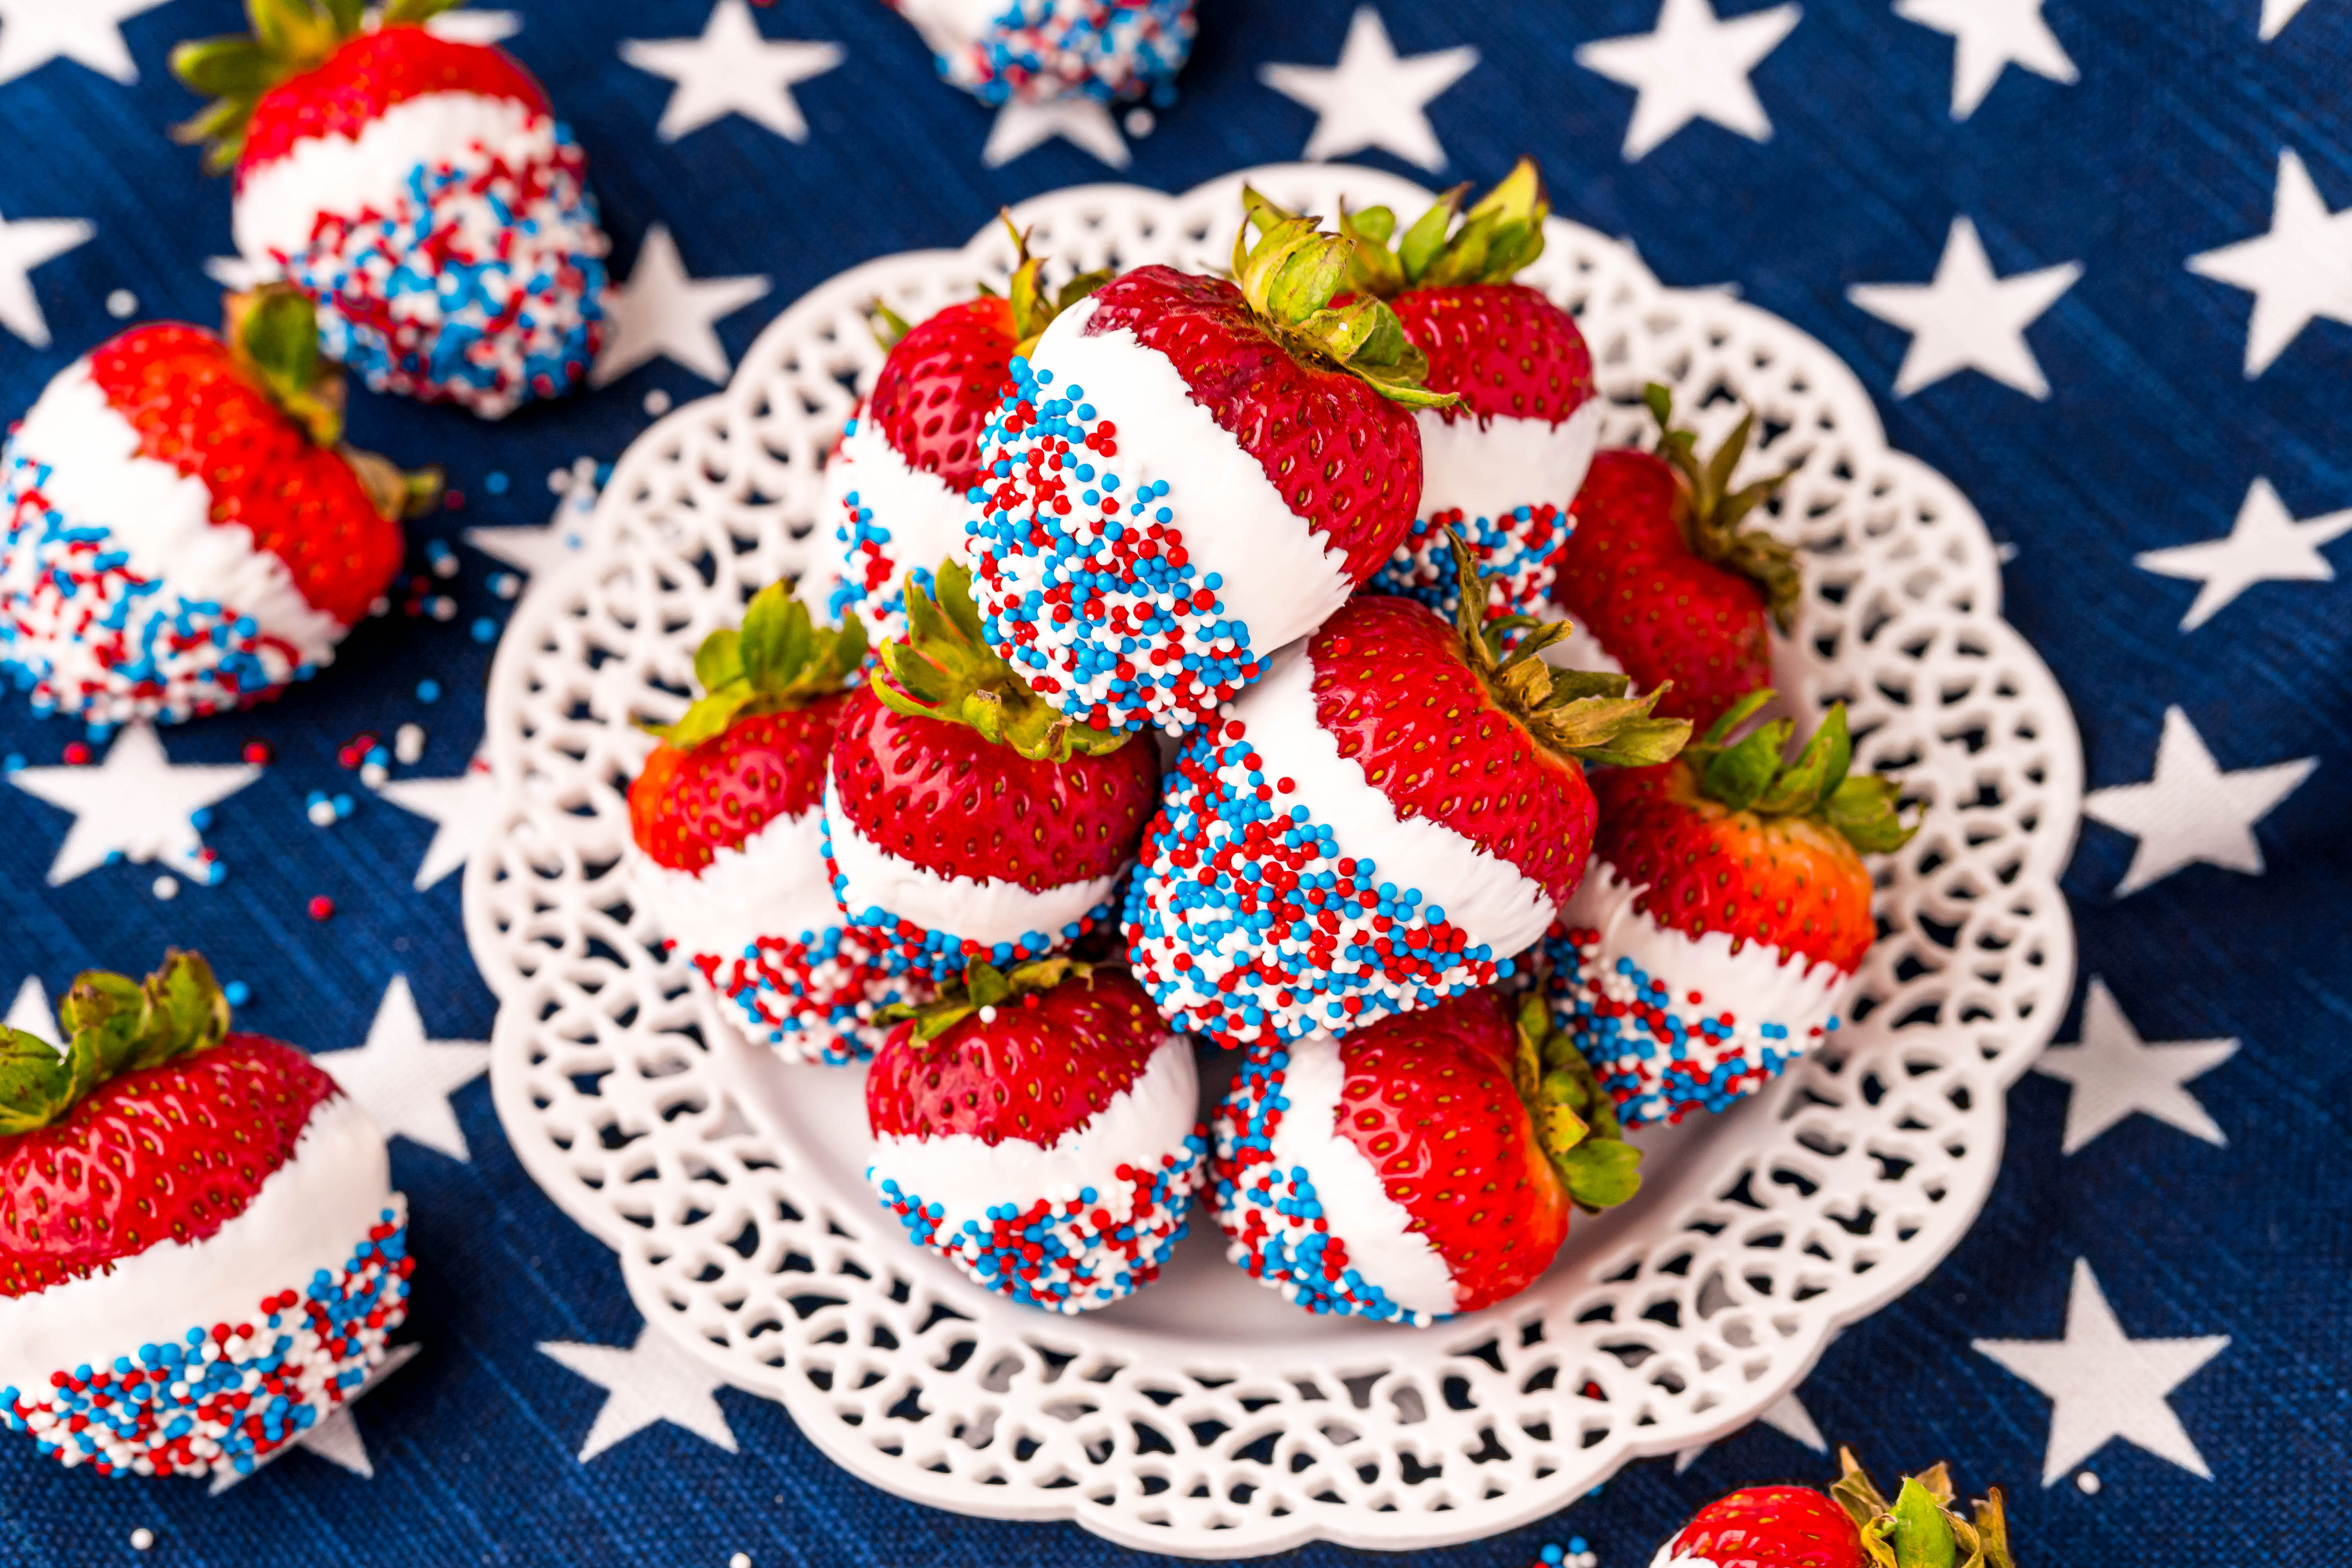 Red, white, and blue dipped strawberries on a white plate on a blue and white star printed napkin.